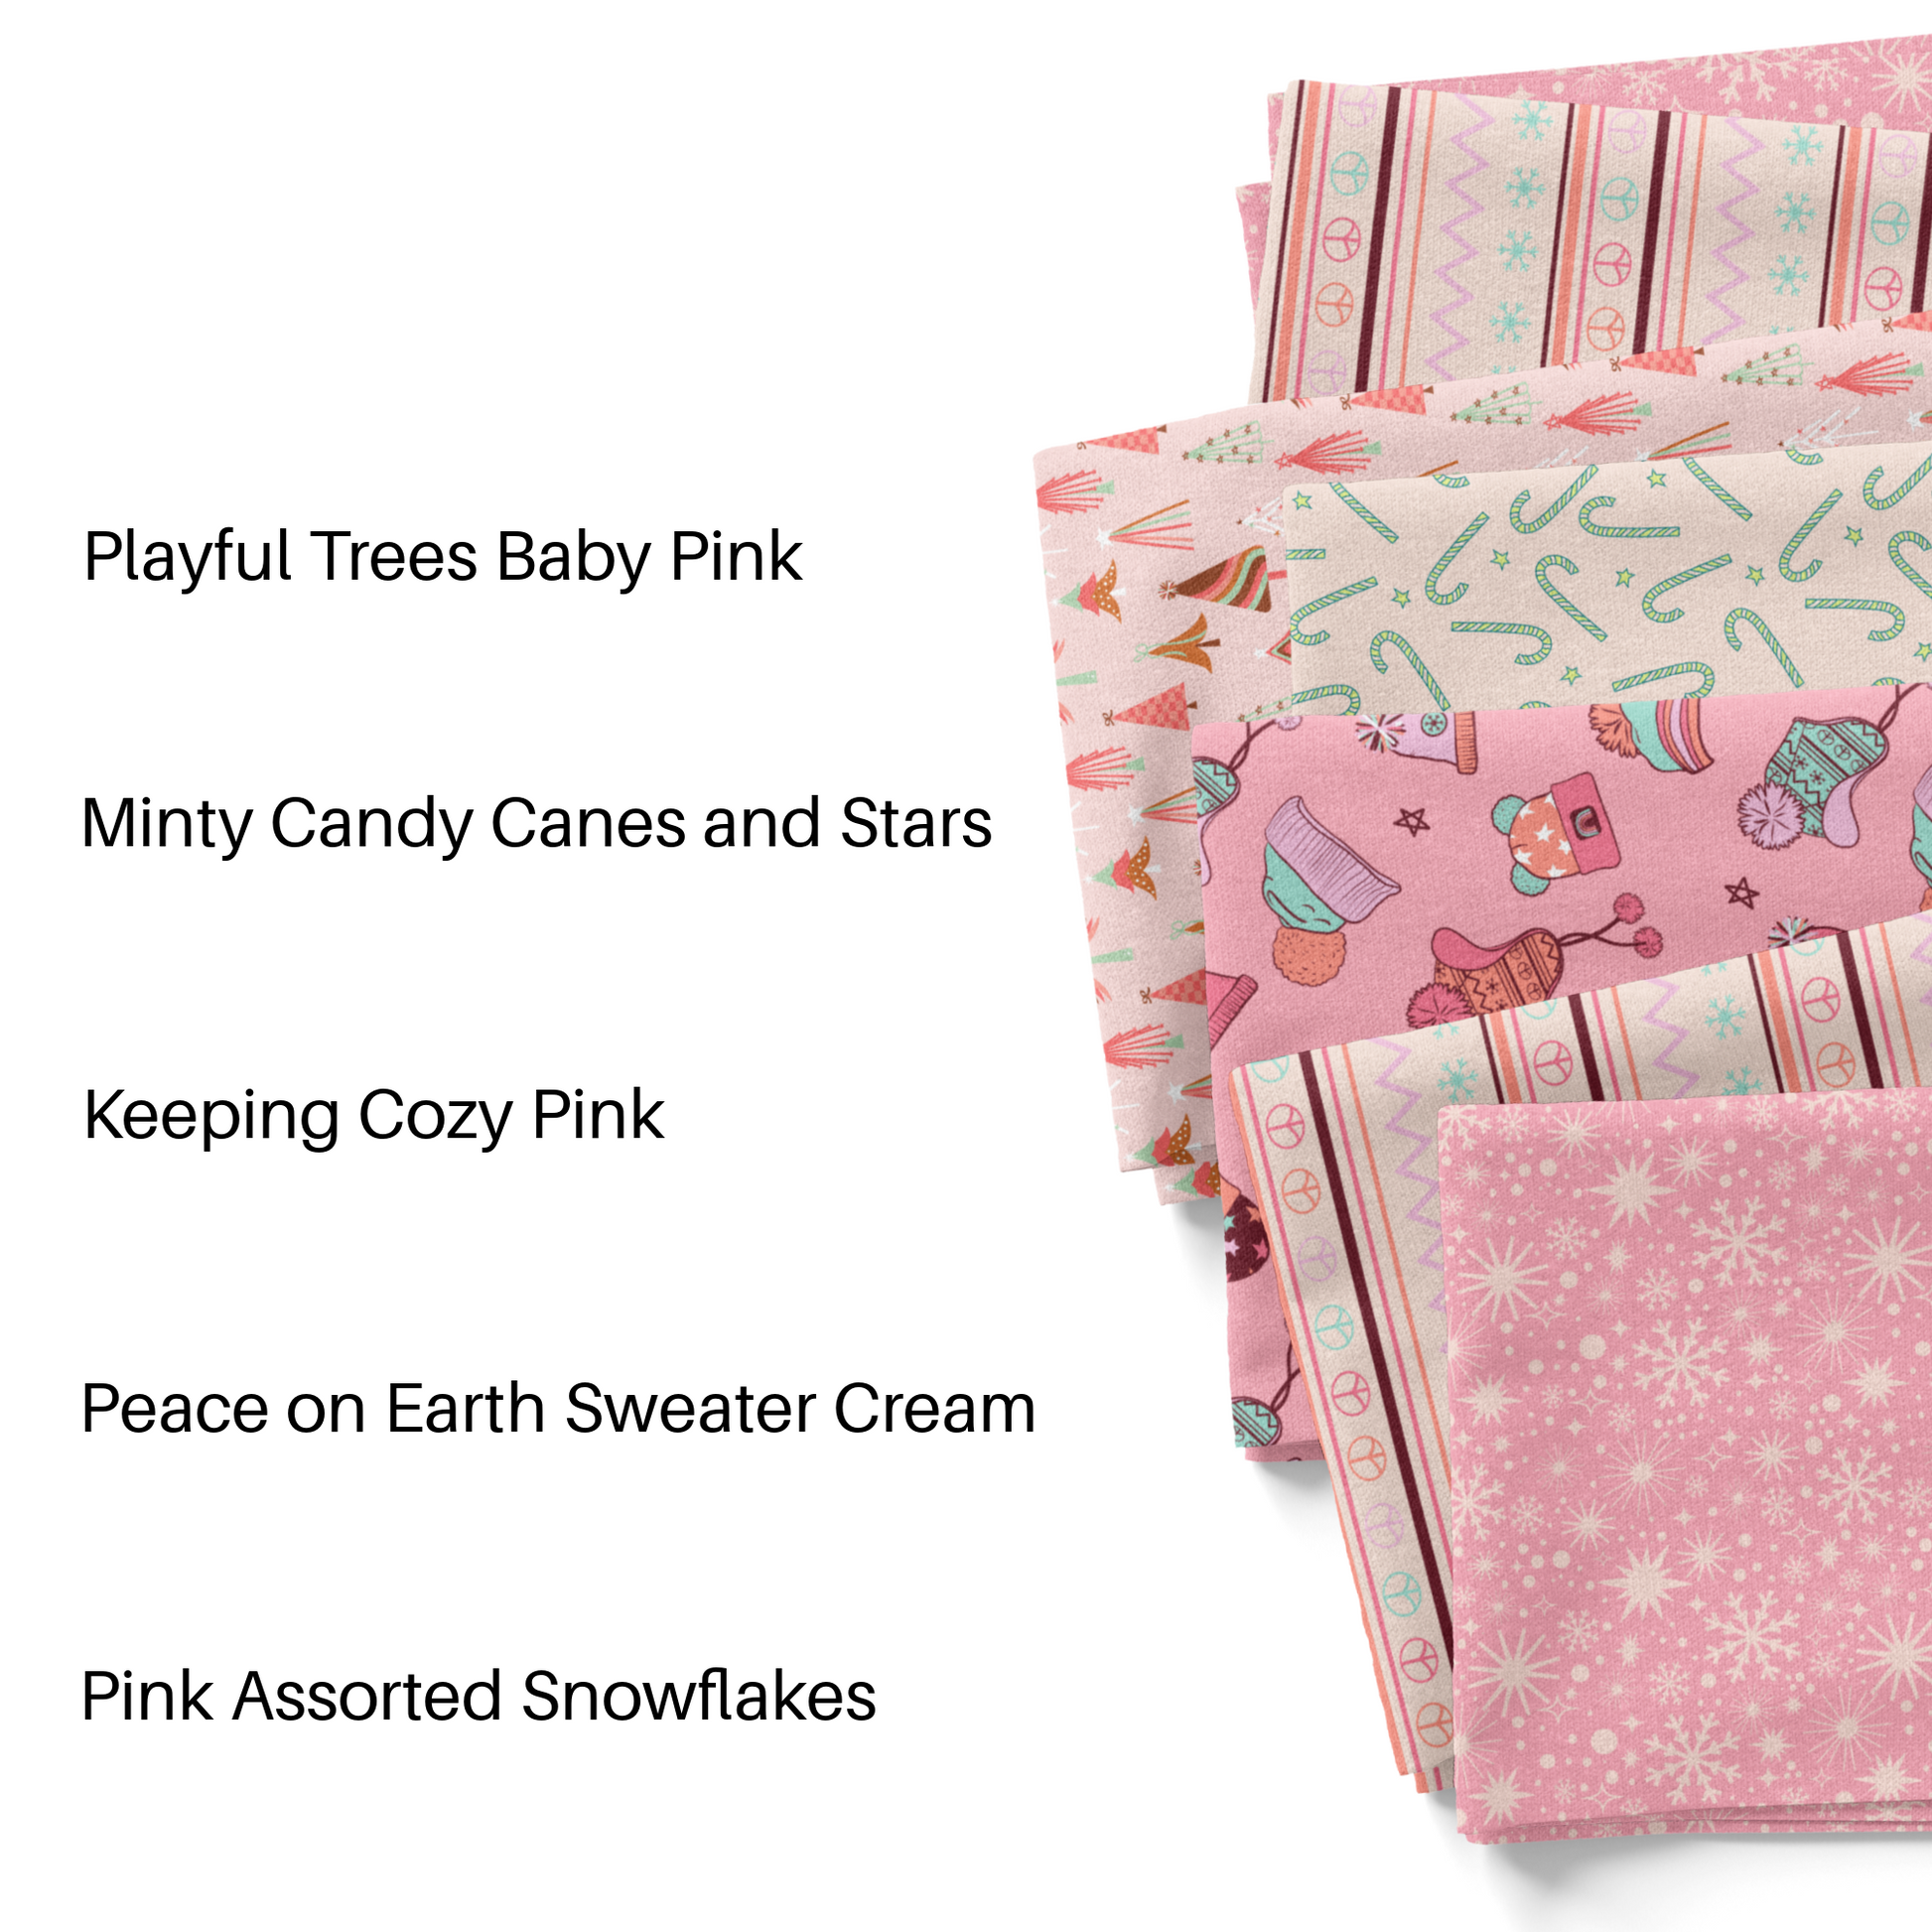 The Peachy Dot Pink Christmas fabric by the yard swatches.